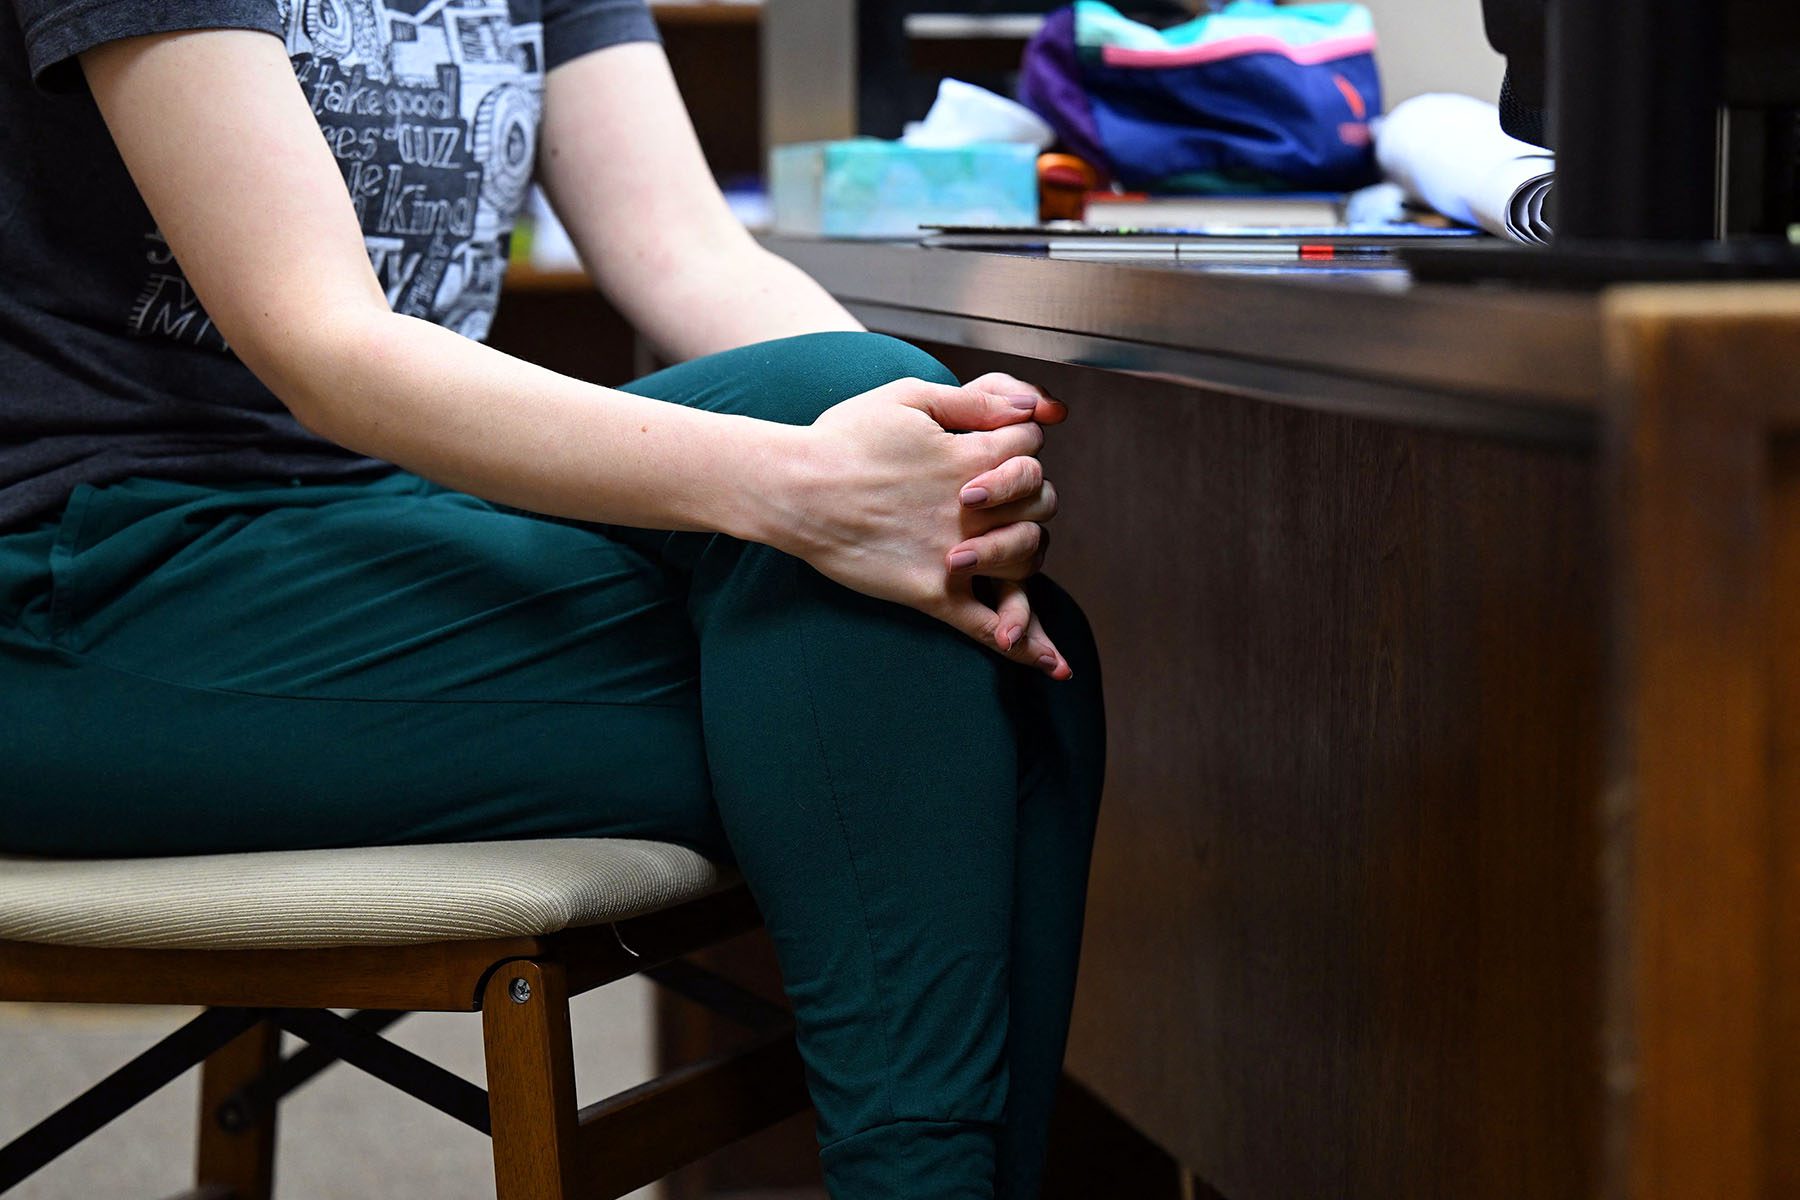 A patient at the Women's Reproductive Clinic in New Mexico